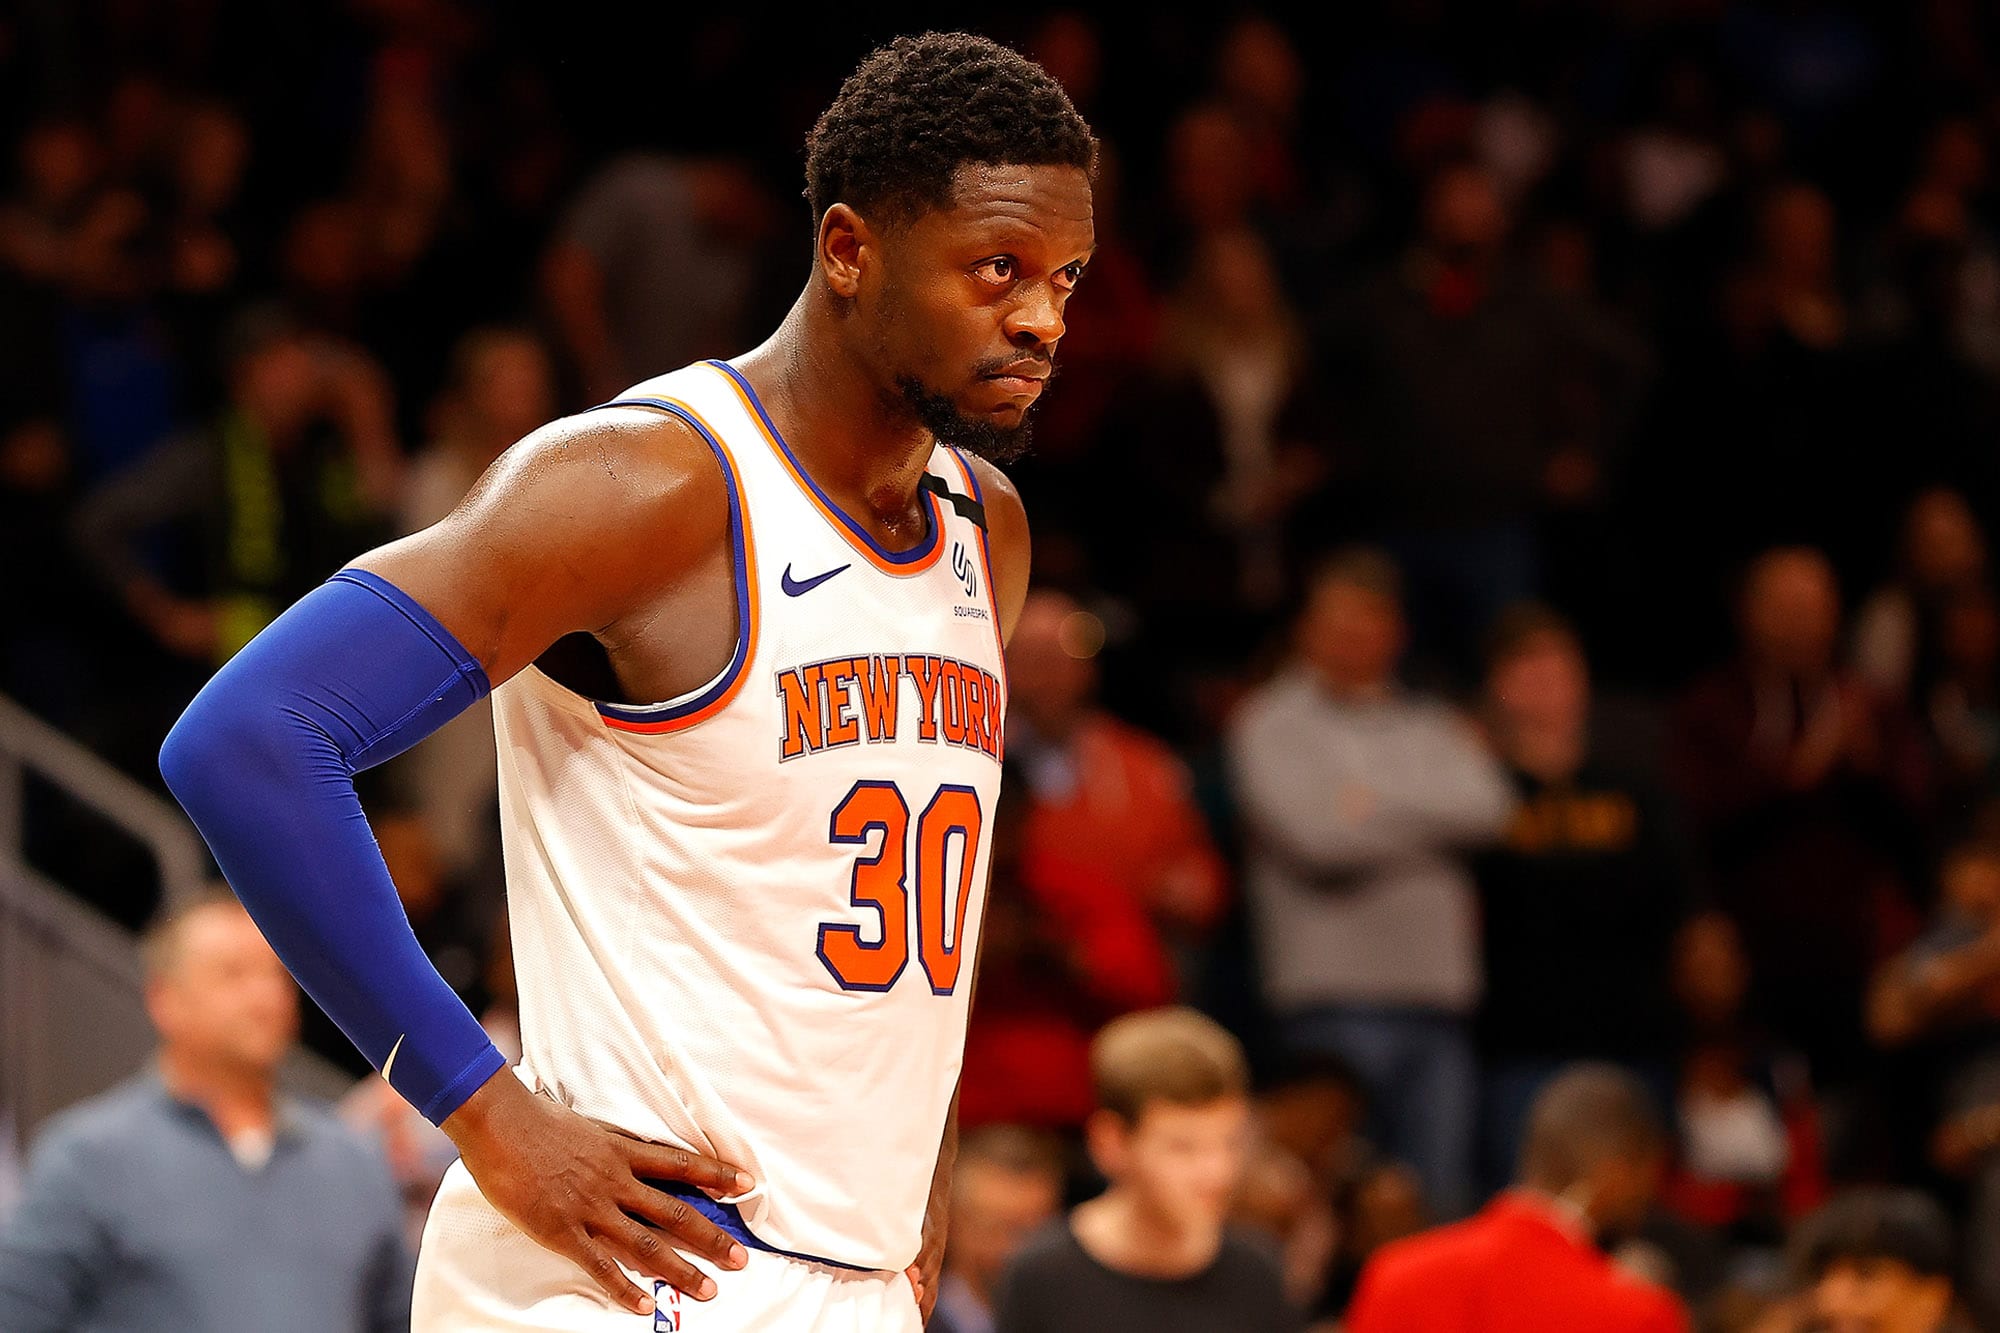 Julius Randle Wins NBA Most Improved Player Award For New York Knicks